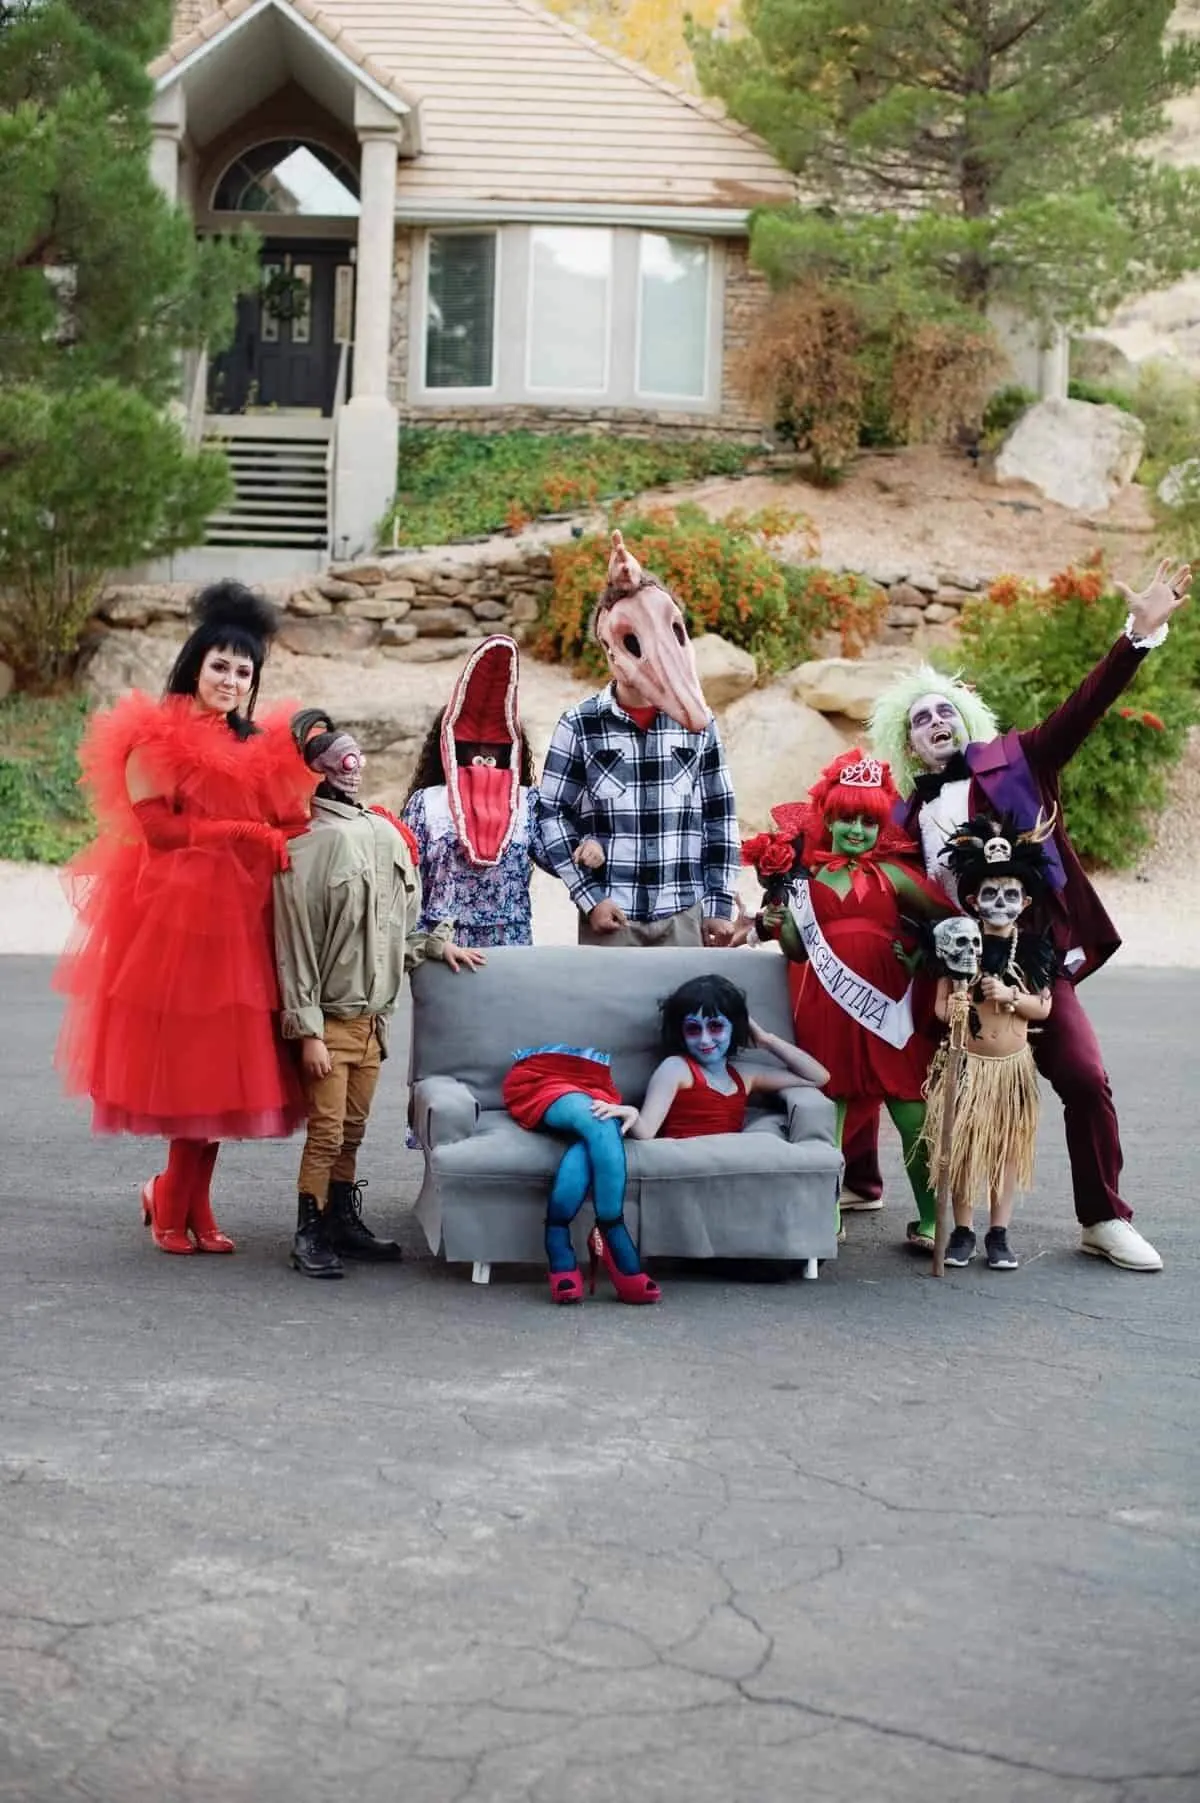 Family beetlejuice costume posting in the middle of a street.